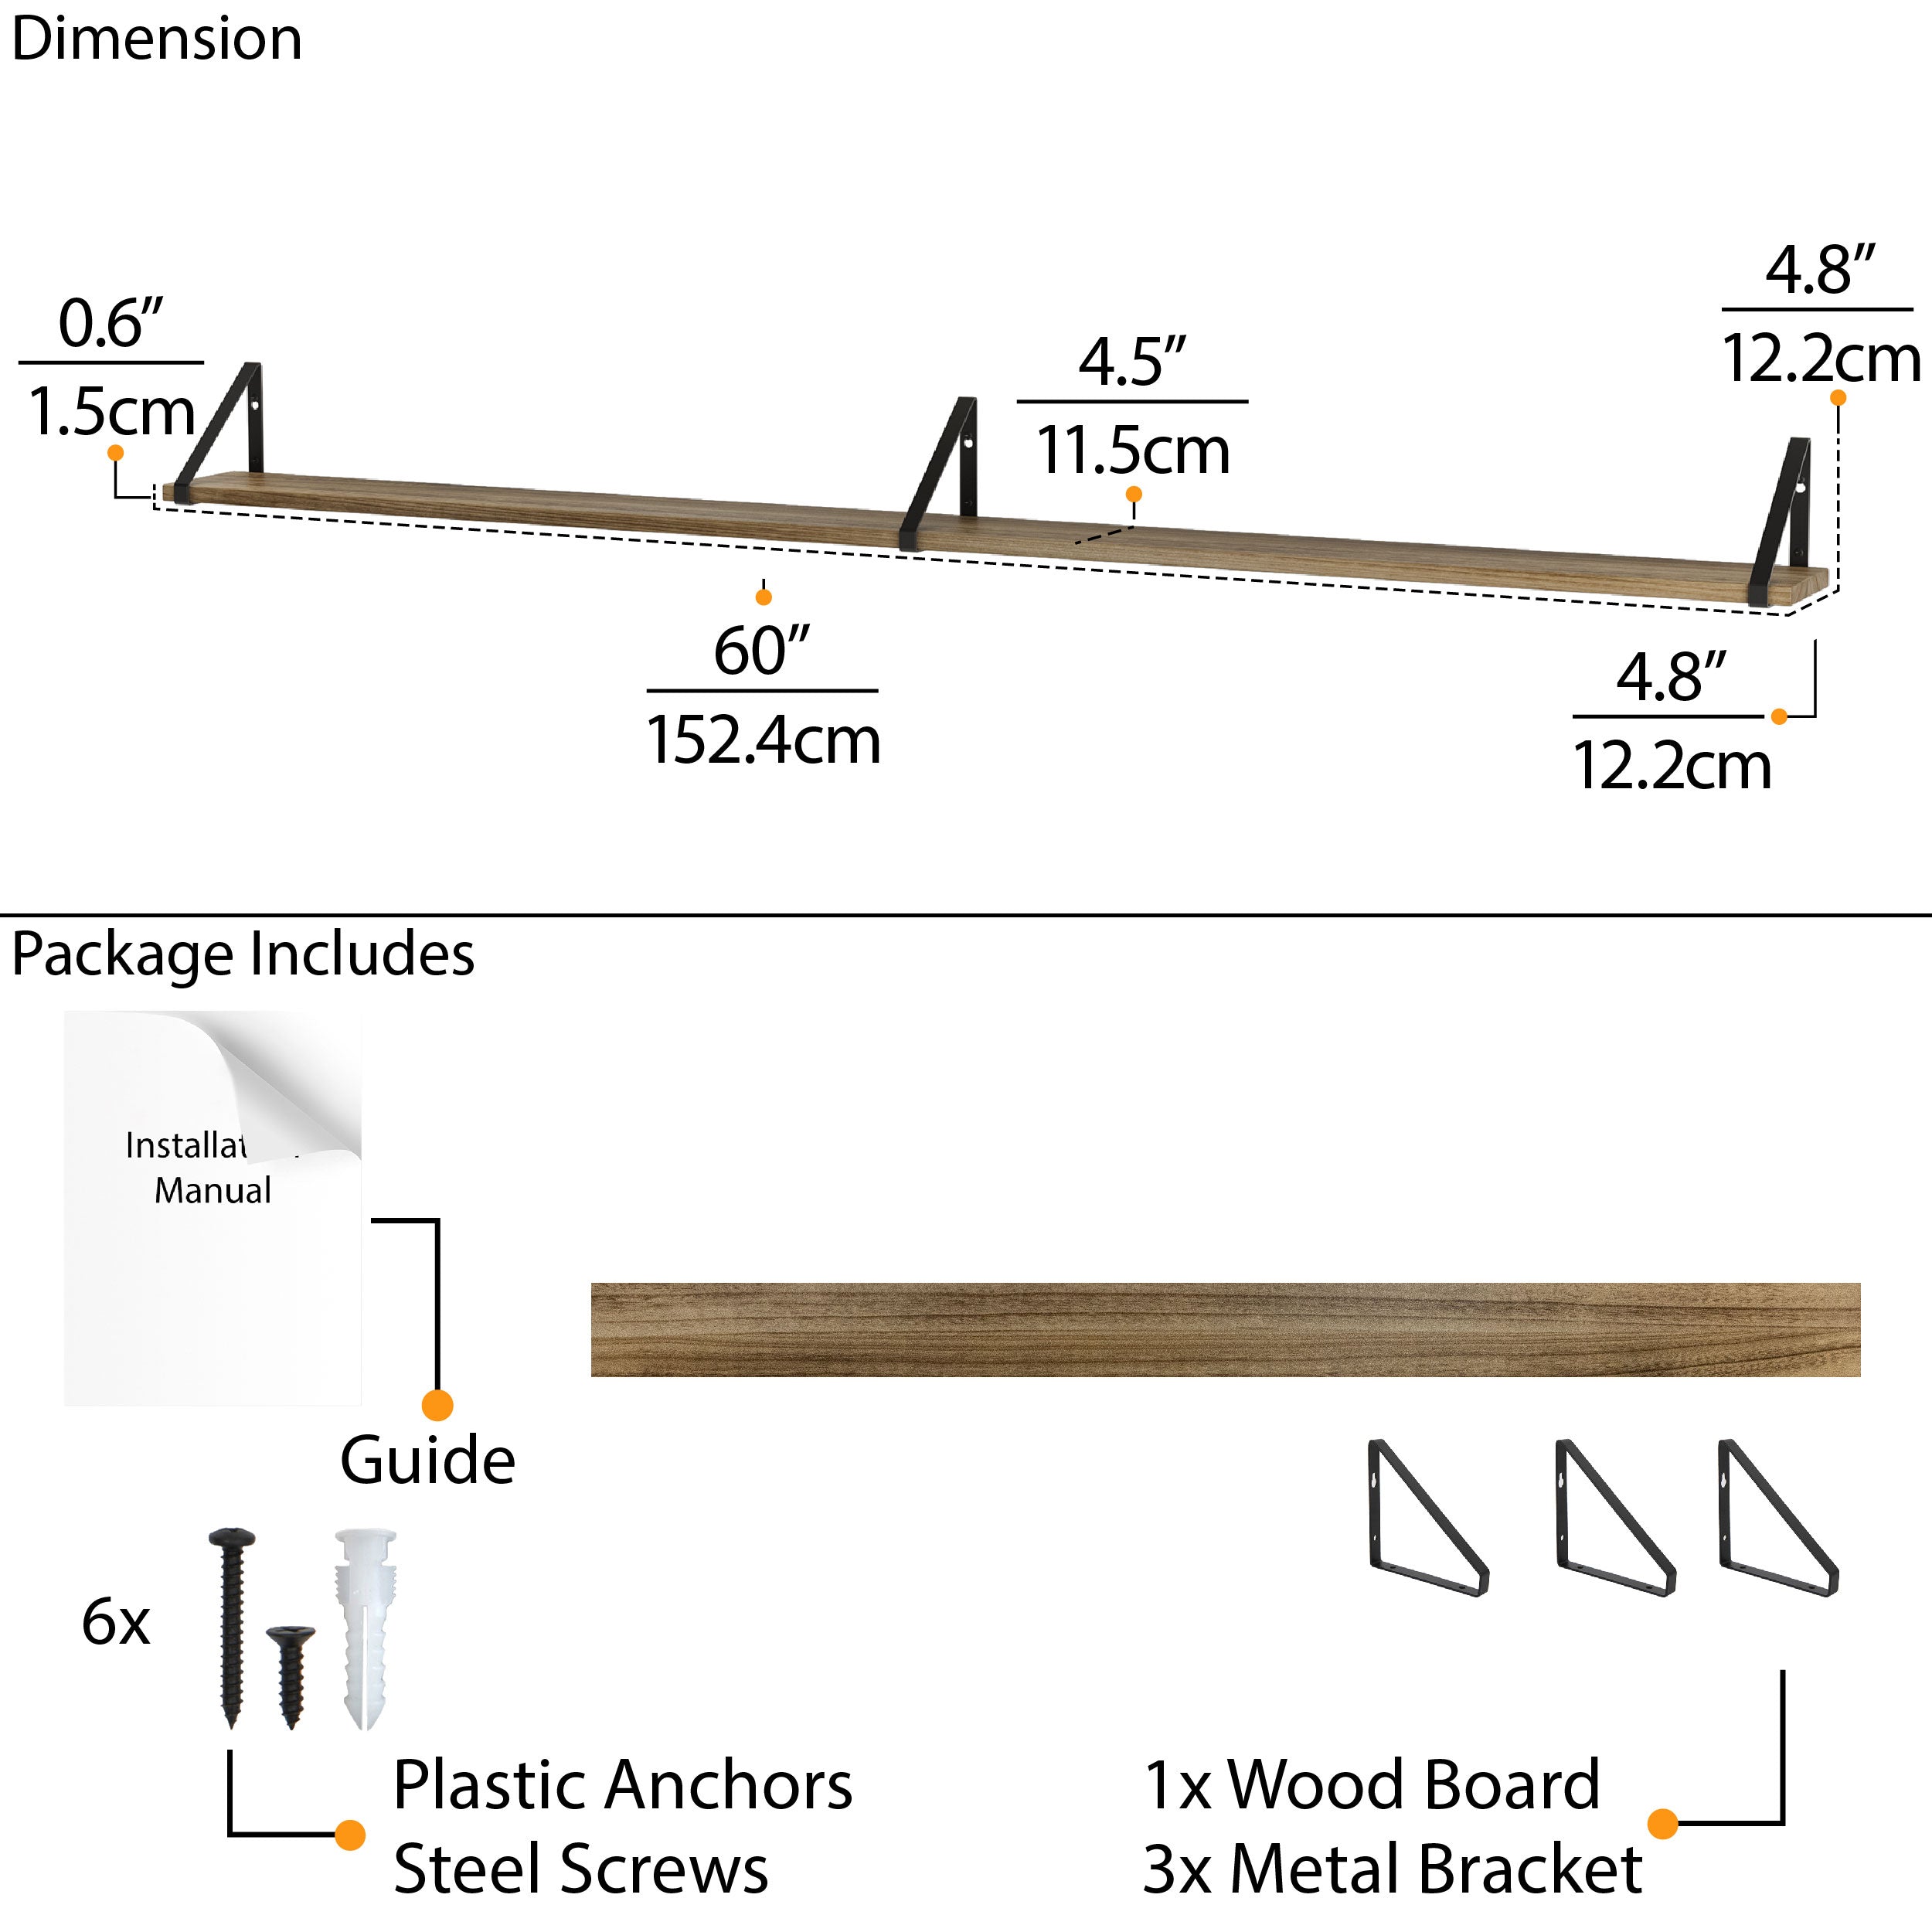 Diagram showing dimensions and package contents of a  60'' wood shelf, including brackets and screws for assembly.